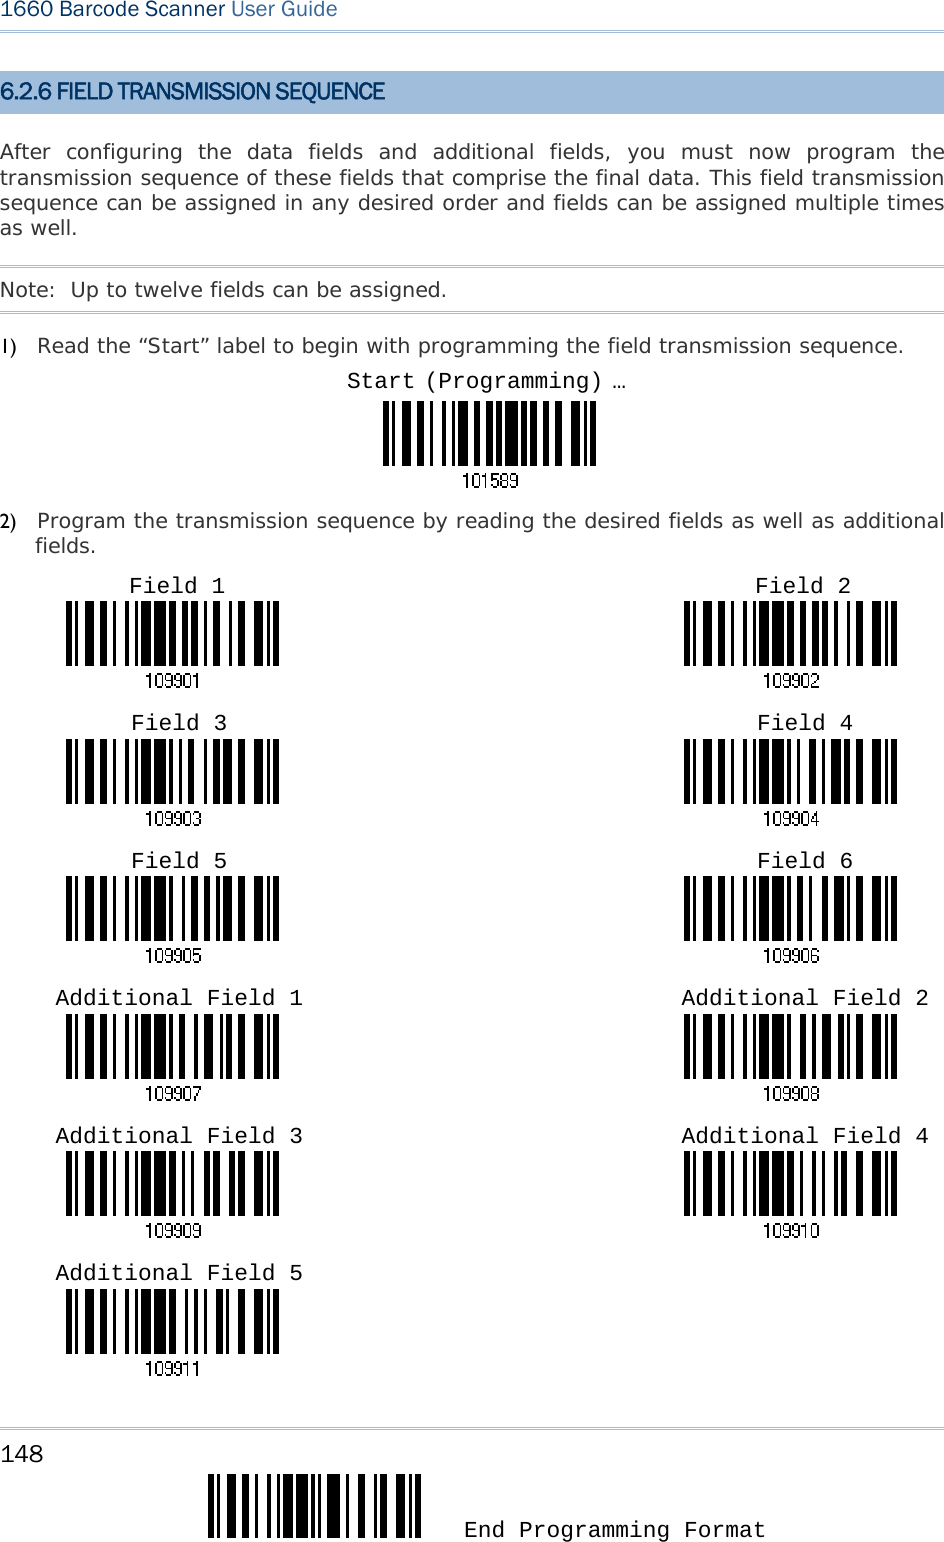 148  End Programming Format 1660 Barcode Scanner User Guide  6.2.6 FIELD TRANSMISSION SEQUENCE After configuring the data fields and additional fields, you must now program the transmission sequence of these fields that comprise the final data. This field transmission sequence can be assigned in any desired order and fields can be assigned multiple times as well.  Note:  Up to twelve fields can be assigned. 1) Read the “Start” label to begin with programming the field transmission sequence.  2) Program the transmission sequence by reading the desired fields as well as additional fields.                                                                                                                                                                                                                       Start (Programming) …Field 1  Field 2 Field 3  Field 4 Field 5  Field 6 Additional Field 1  Additional Field 2 Additional Field 3  Additional Field 4 Additional Field 5 